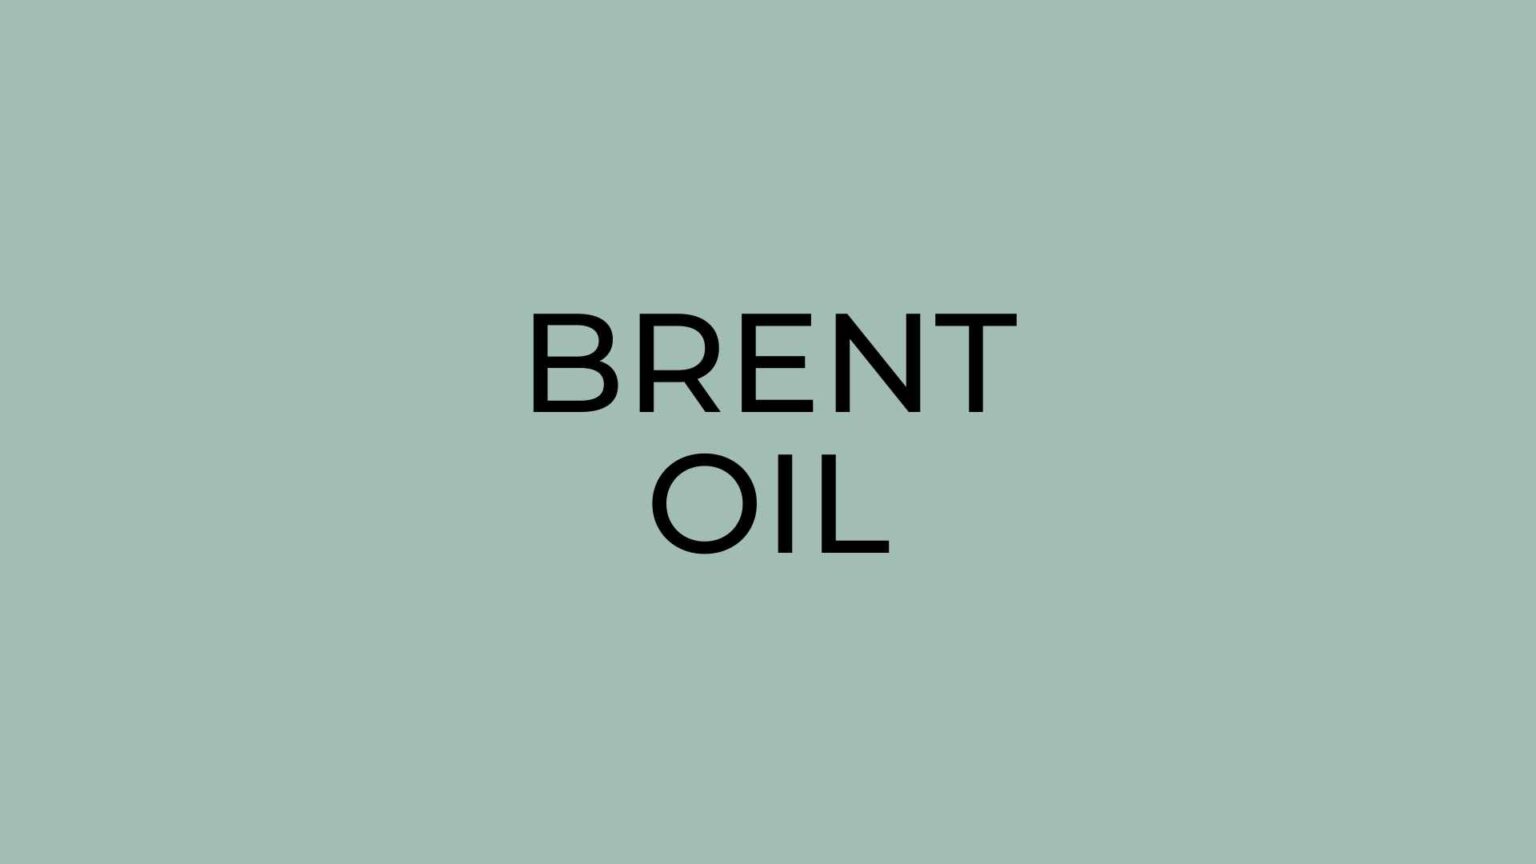 Brent crude oil price today .84+1.80 (+2.61%) – 11 August 21